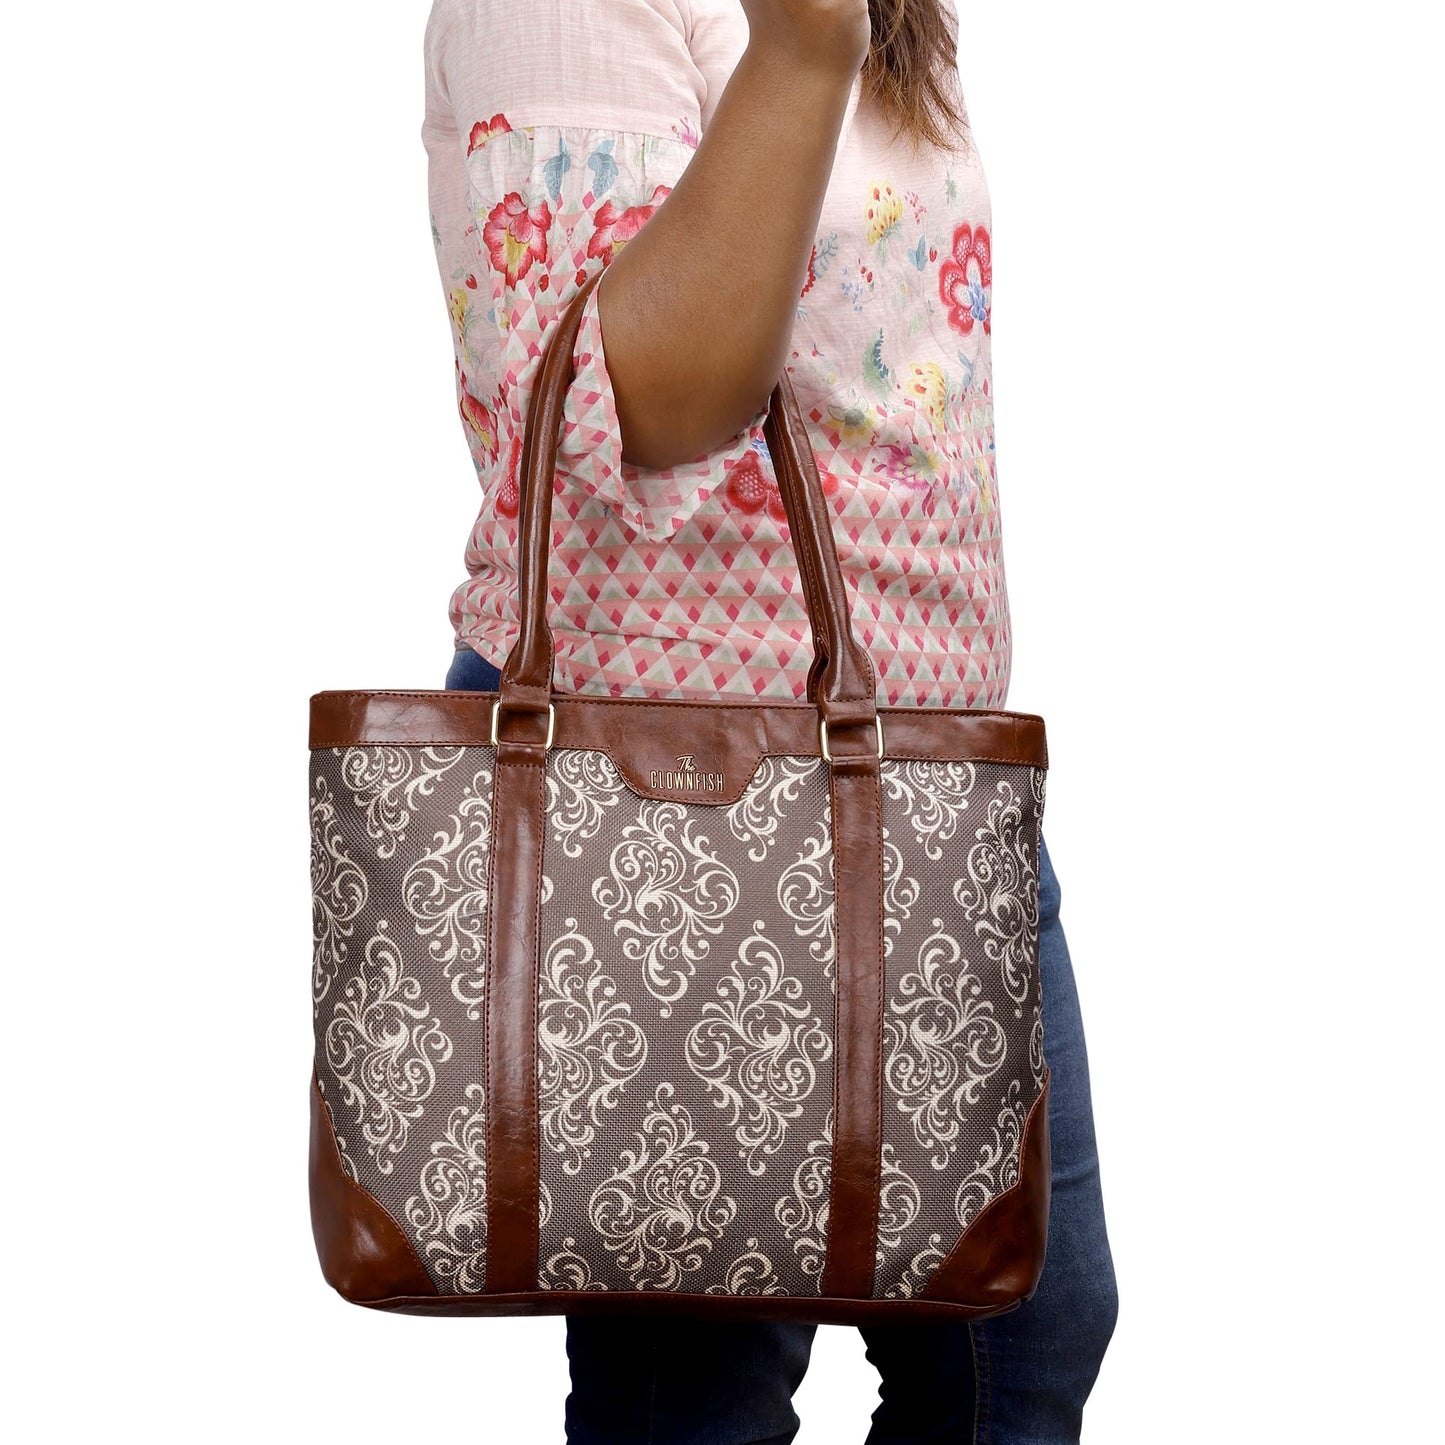 THE CLOWNFISH Miranda Series 15.6 inch Laptop Bag For Women Printed Handicraft Fabric & Faux Leather Office Bag Briefcase Hand Messenger bag Tote Shoulder Bag (Brown)